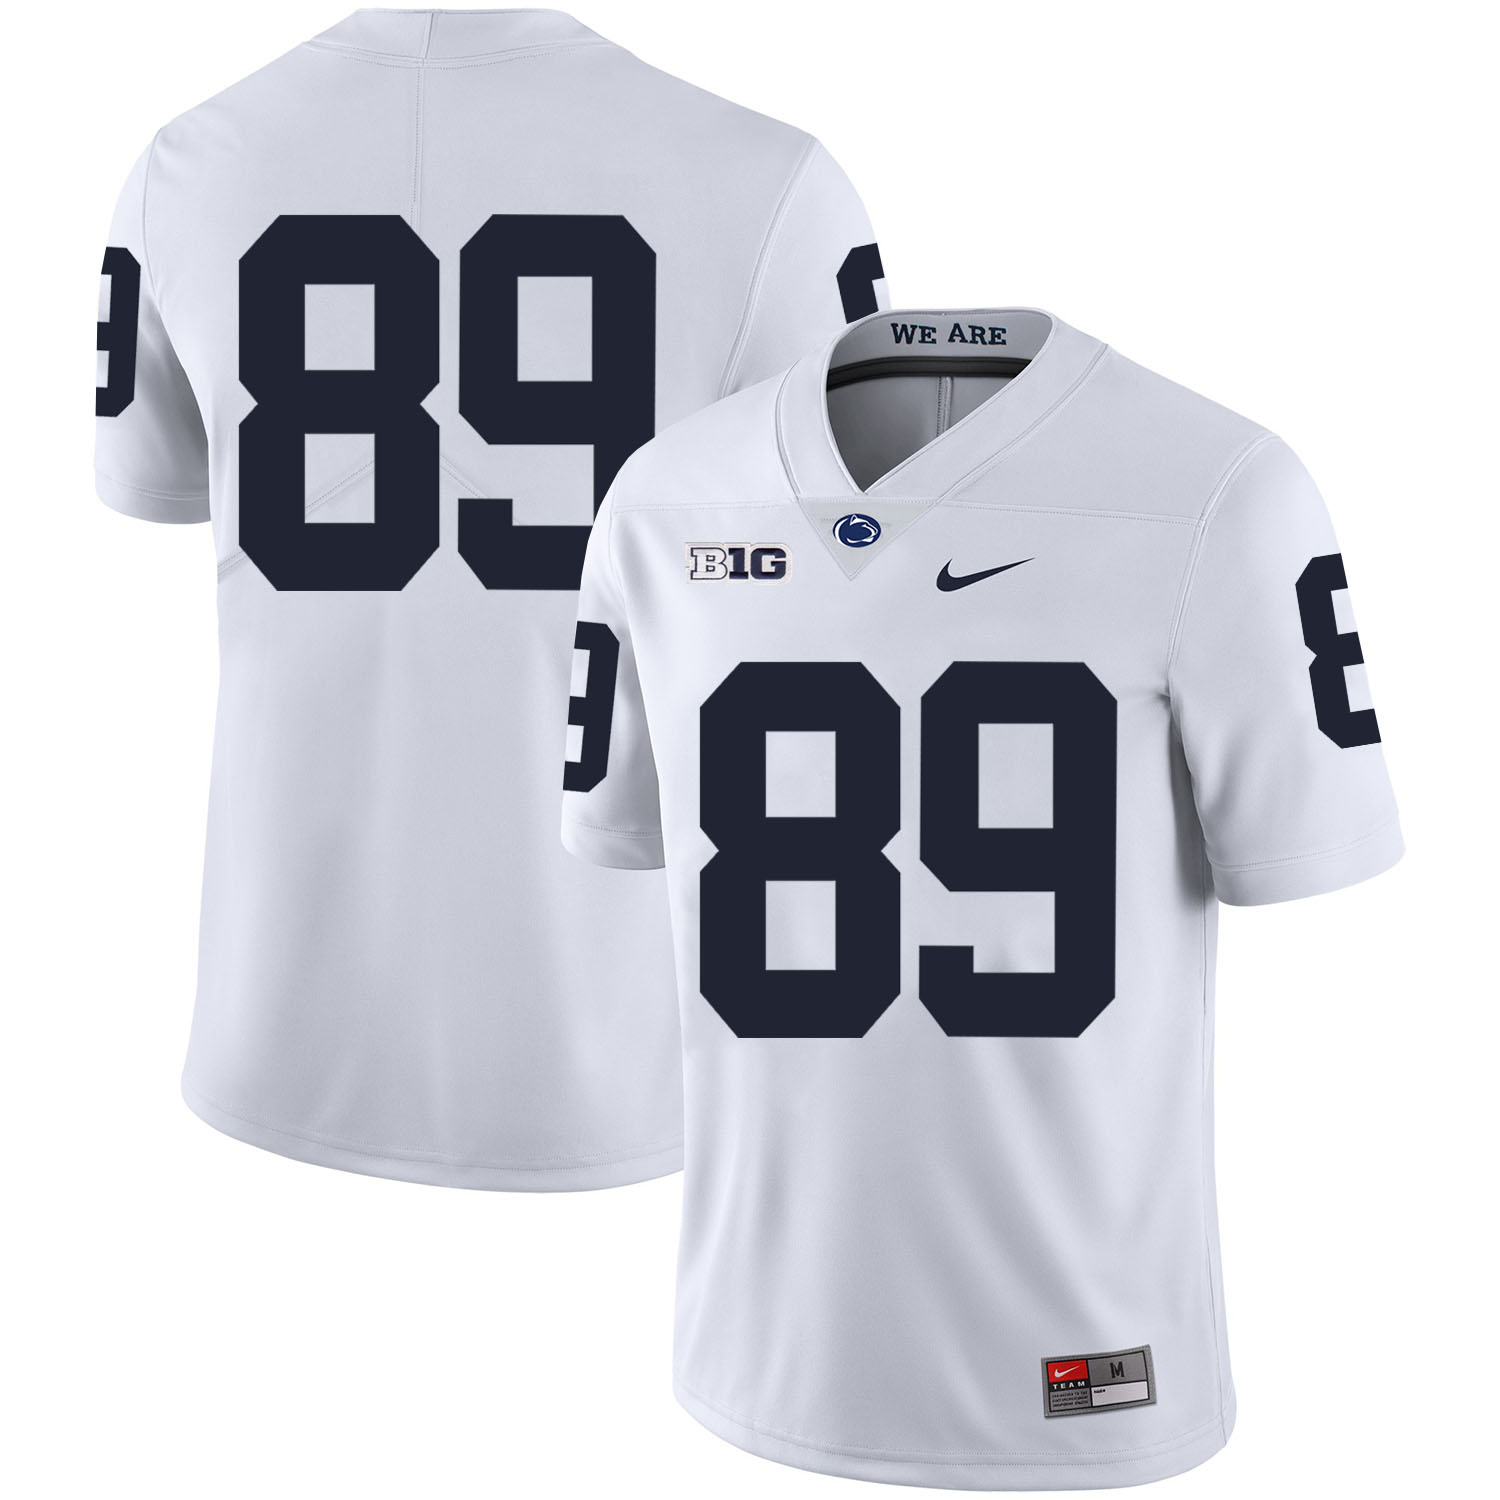 Penn State Nittany Lions 89 Garry Gilliam White Nike College Football Jersey